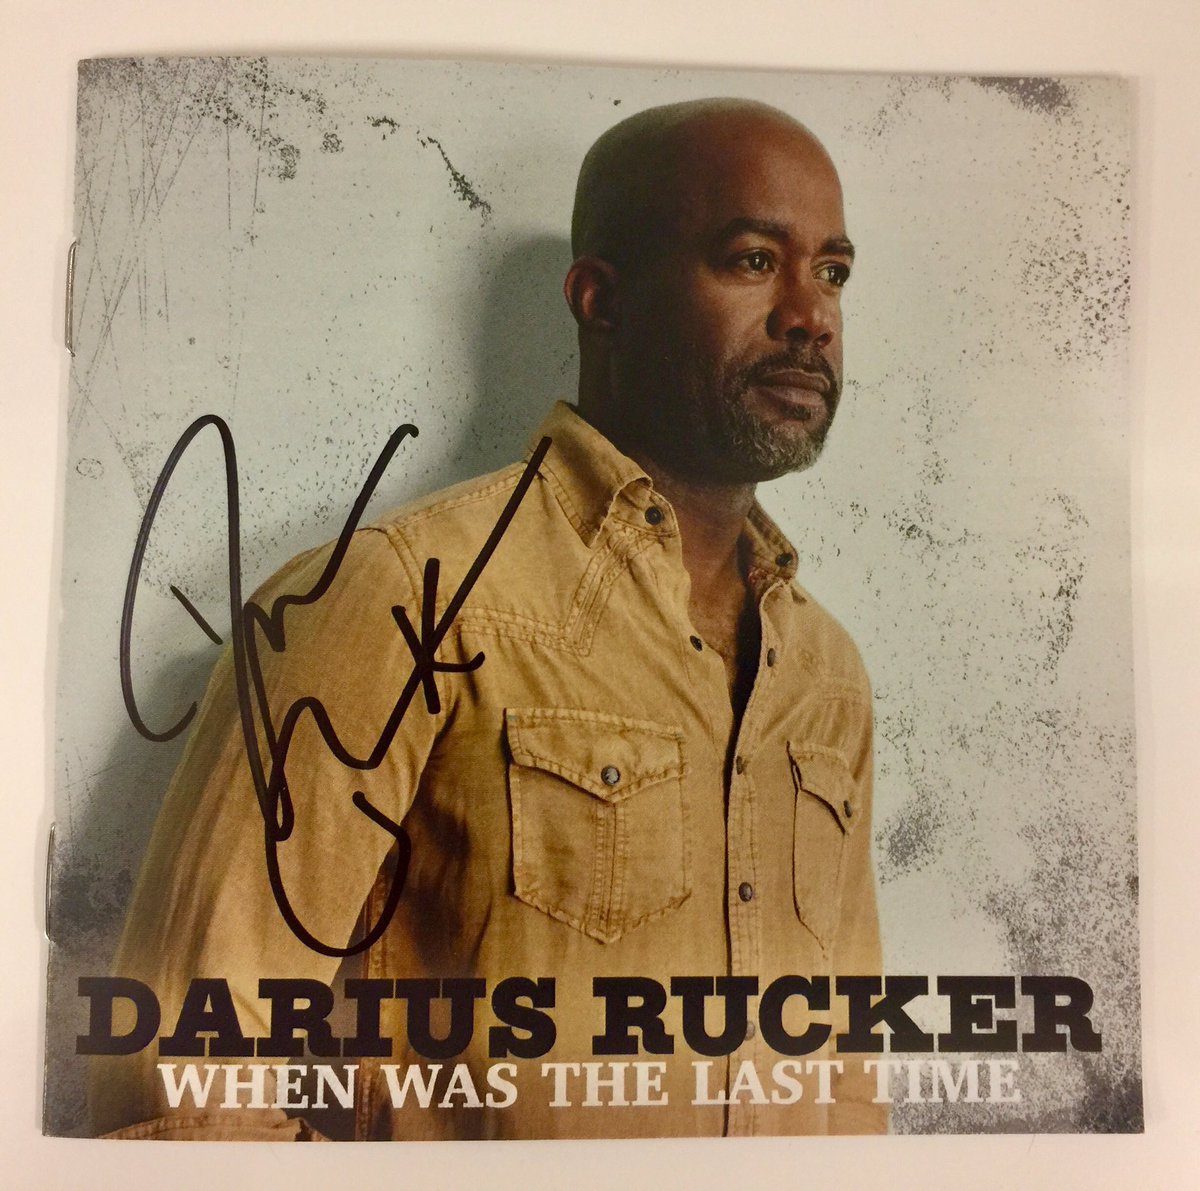 RT and be following for a chance to win a signed Darius Rucker #WhenWasTheLastTime CD!

Check out the video: umgn.us/ForTheFirstTim…